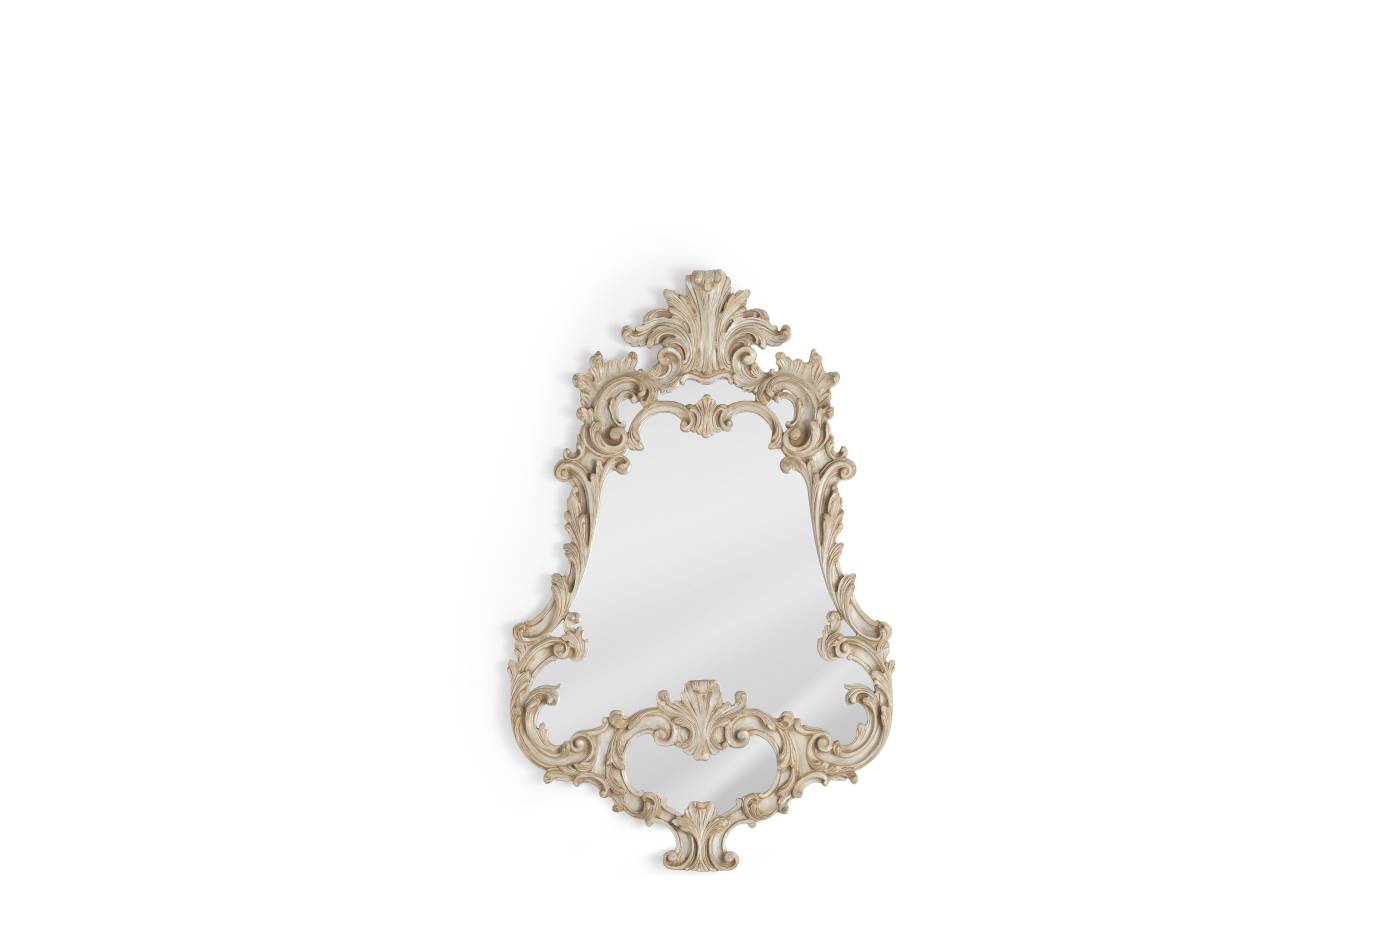 GARDEN mirror - Elevate your spaces with Made in Italy luxury classic MIRRORS.